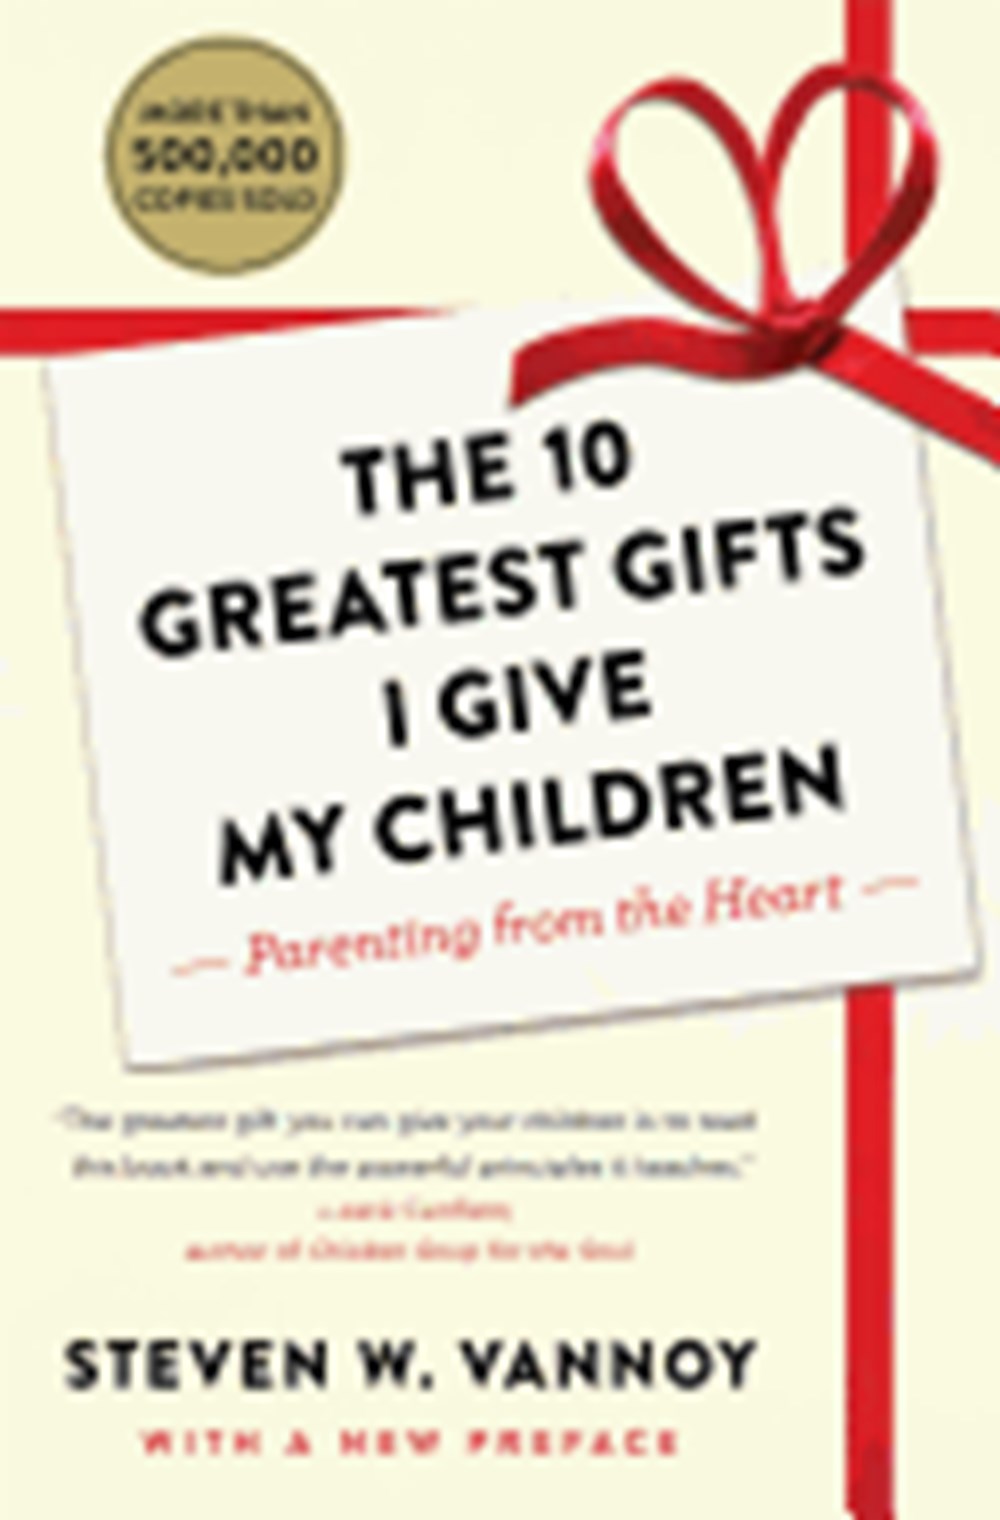 10 Greatest Gifts I Give My Children: Parenting from the Heart